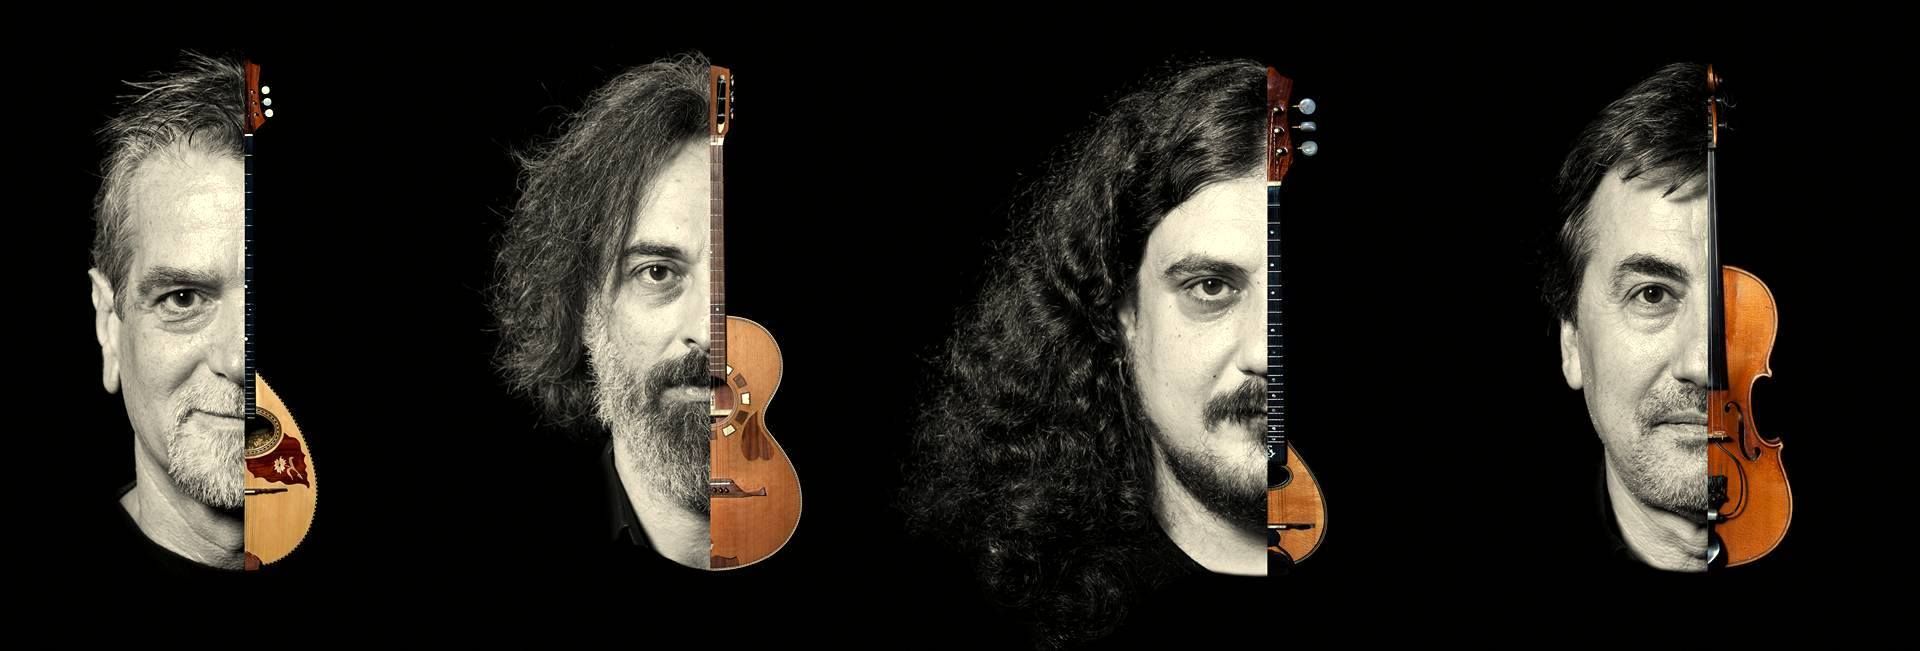 Portraits of four musicians. You can see only the face against a black background. Half of the face is covered by the respective instrument.